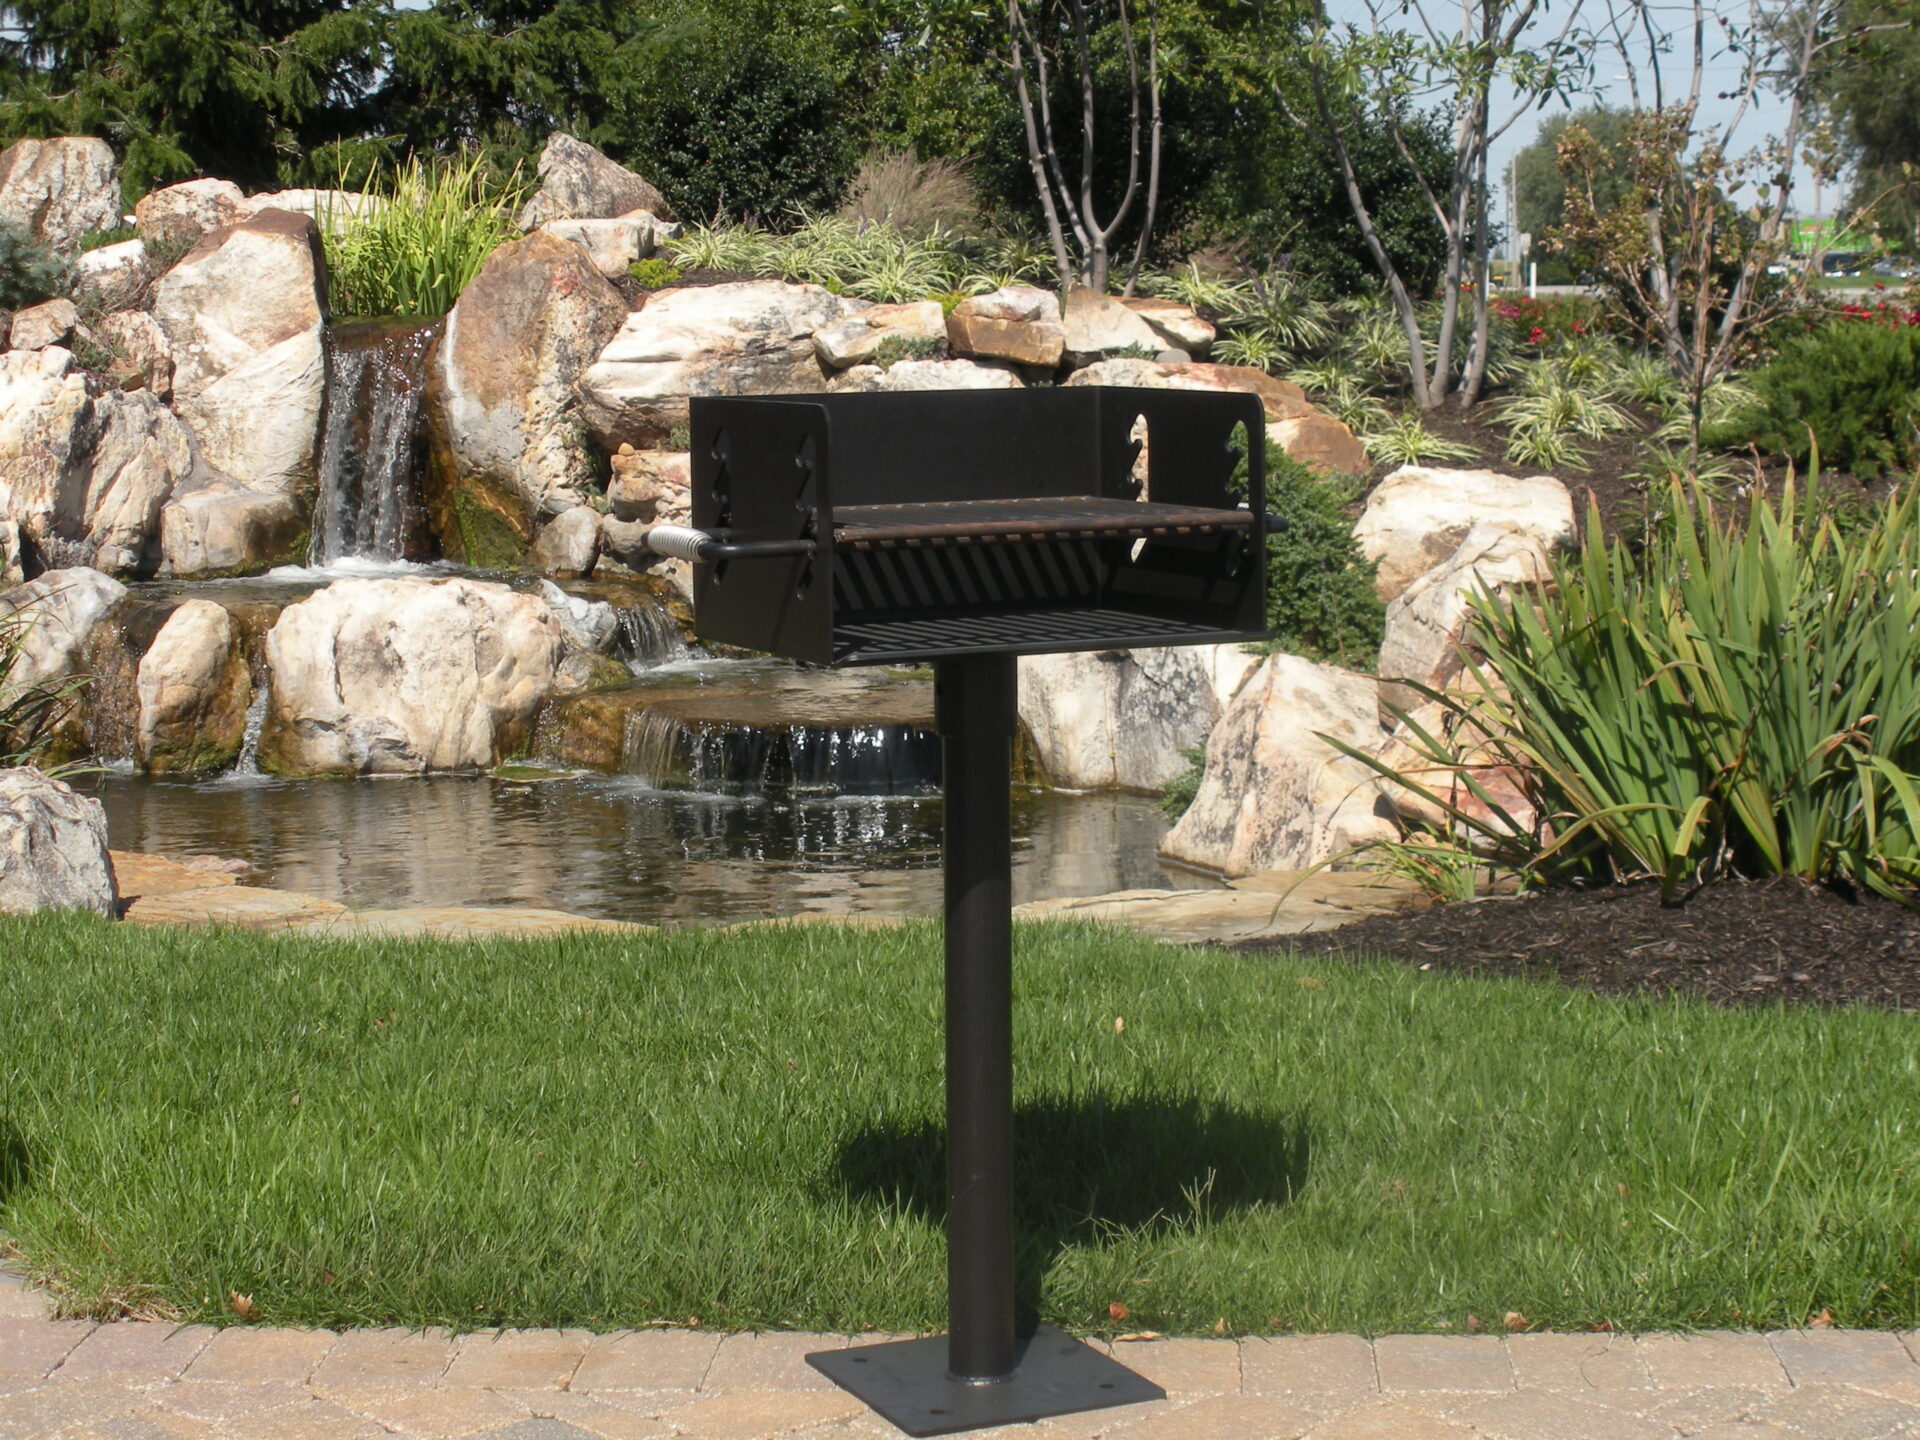 Charcoal grill for parks and campgrounds